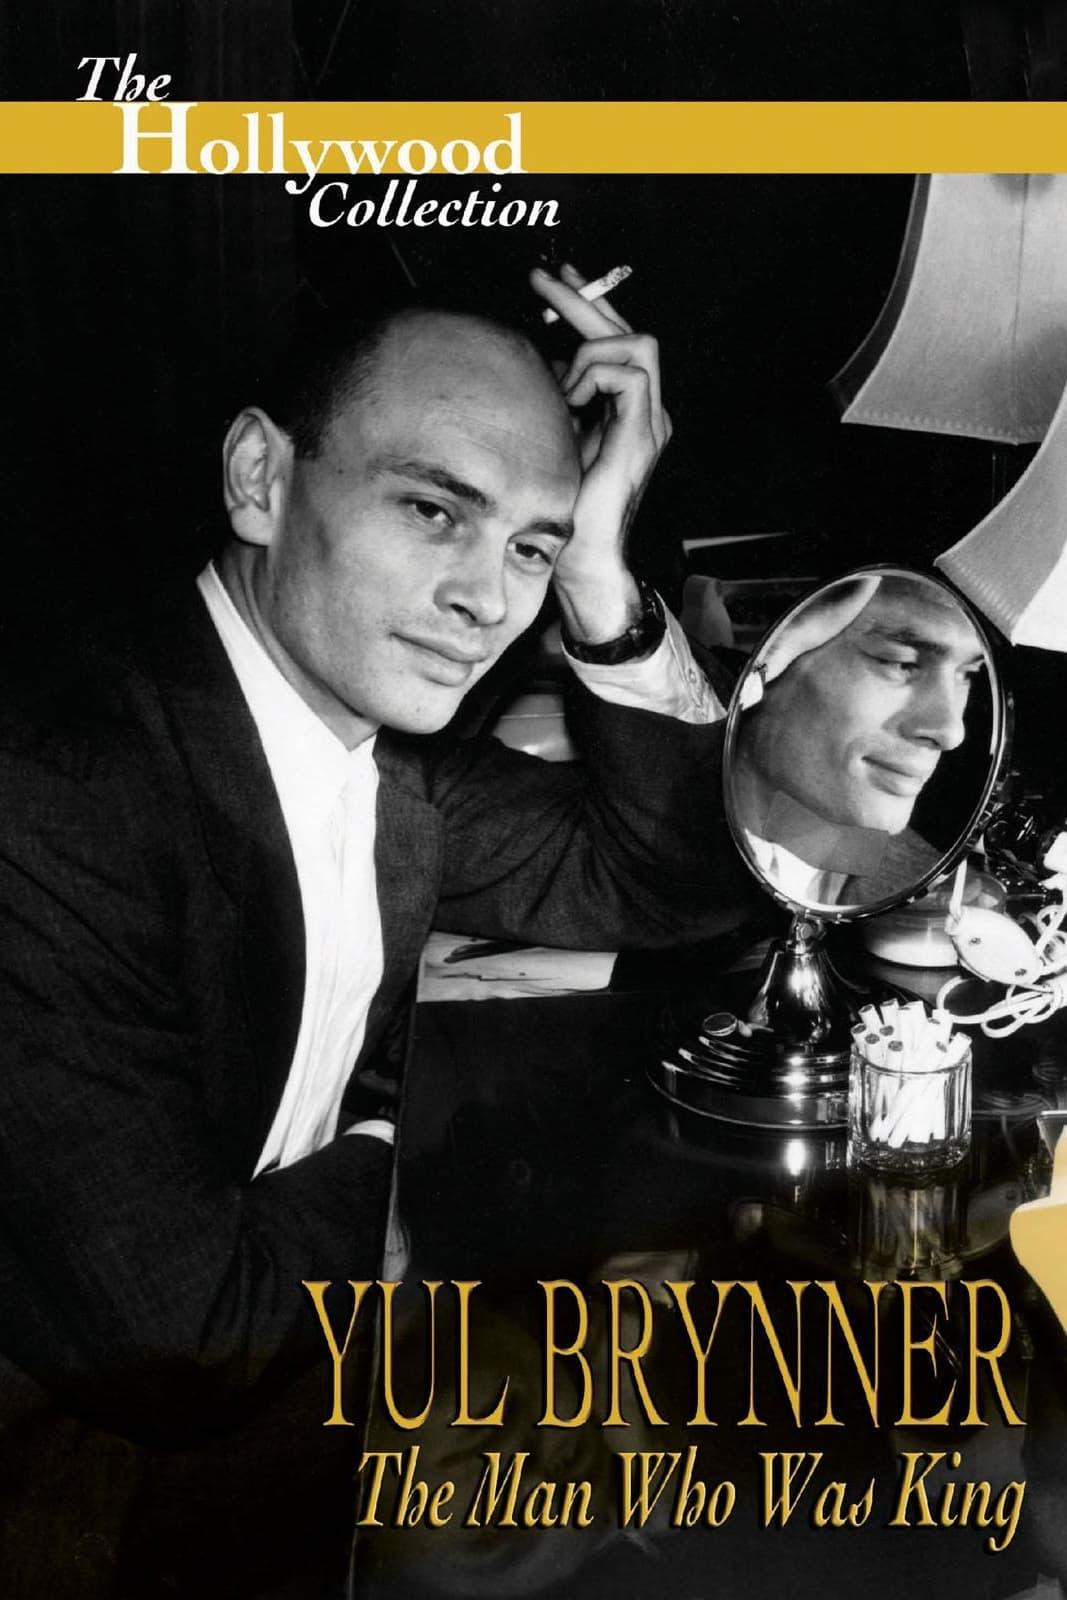 Yul Brynner: The Man Who Was King poster